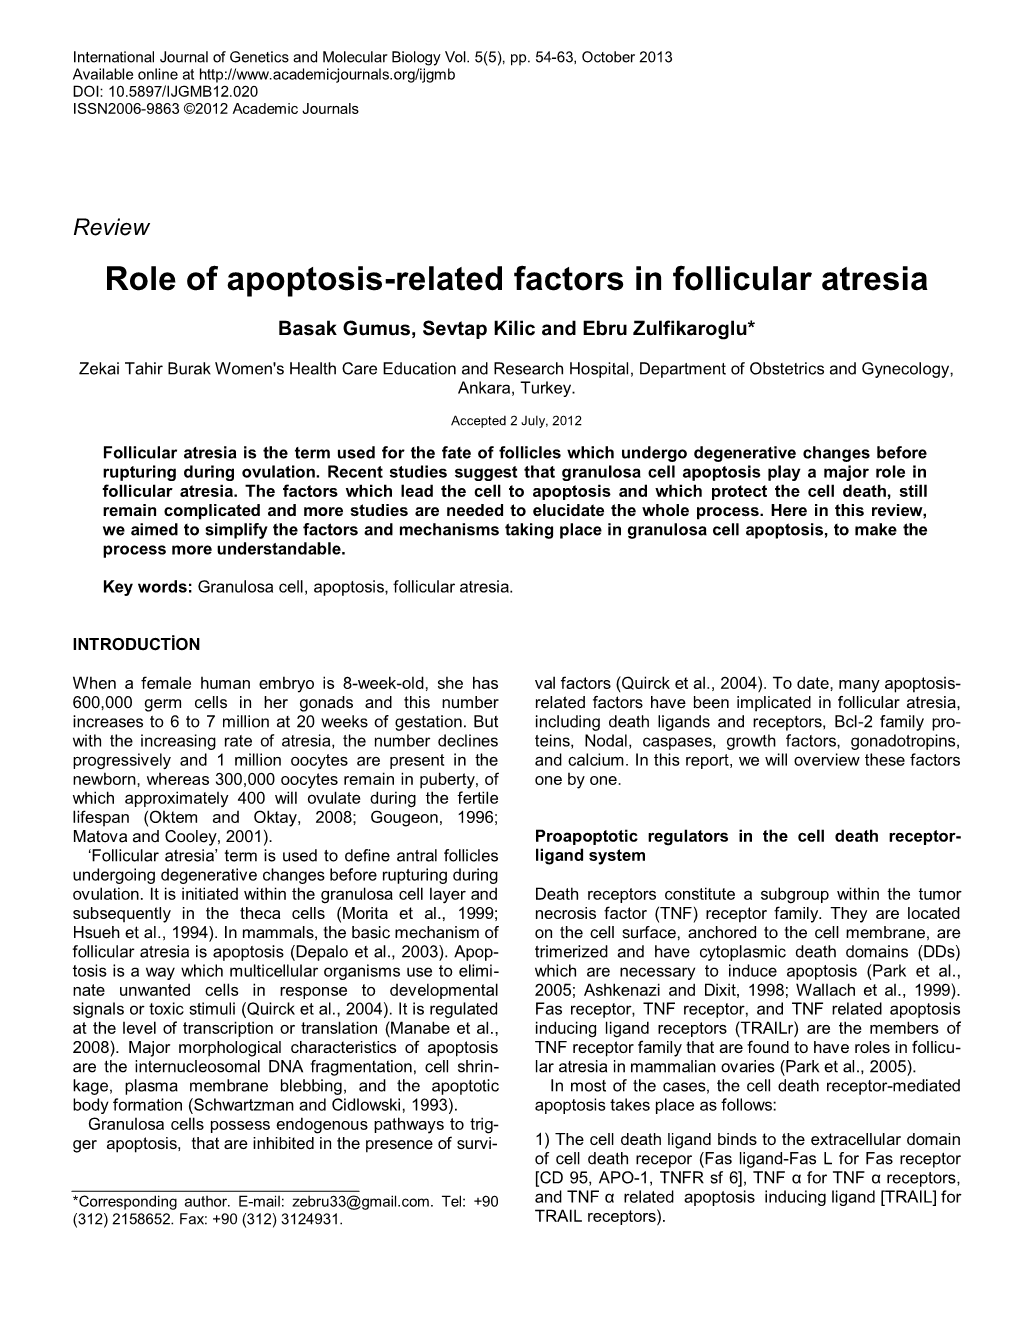 Role of Apoptosis-Related Factors in Follicular Atresia